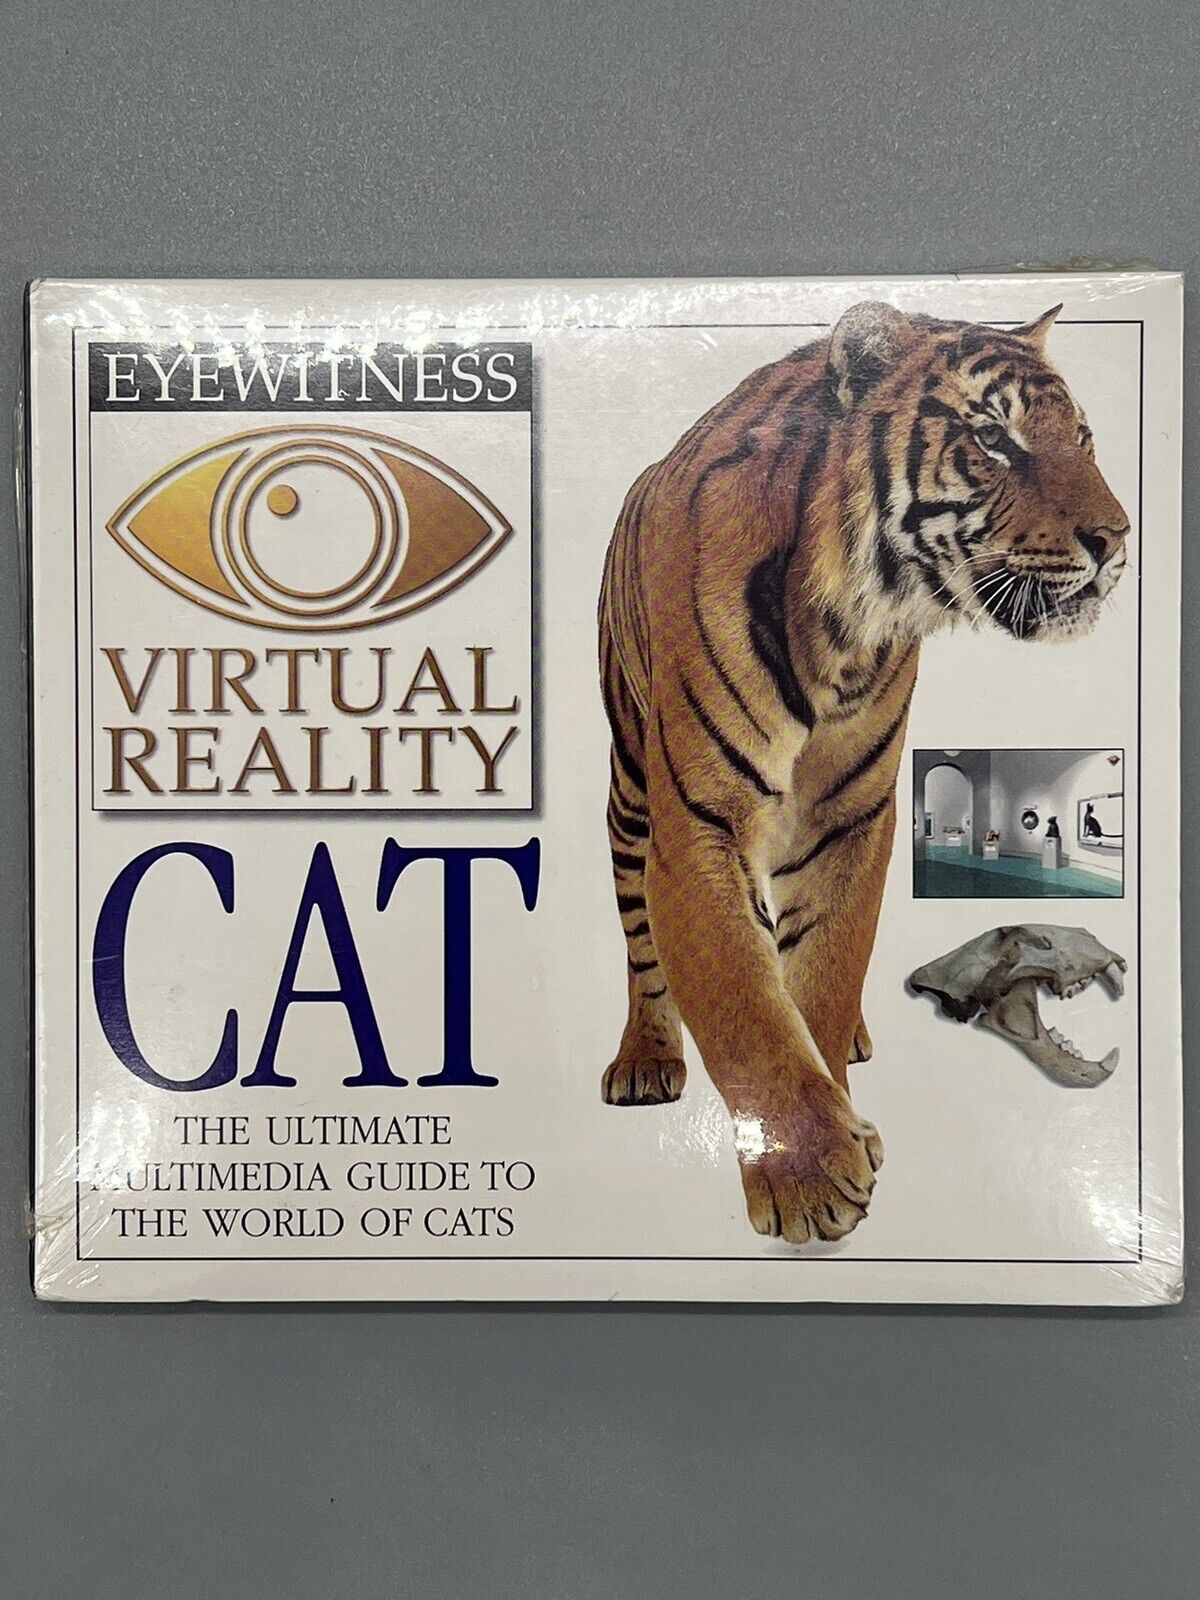 VTG Sealed Eyewitness Virtual Reality Cat CD ROM Ultimate Guide to World of Cats